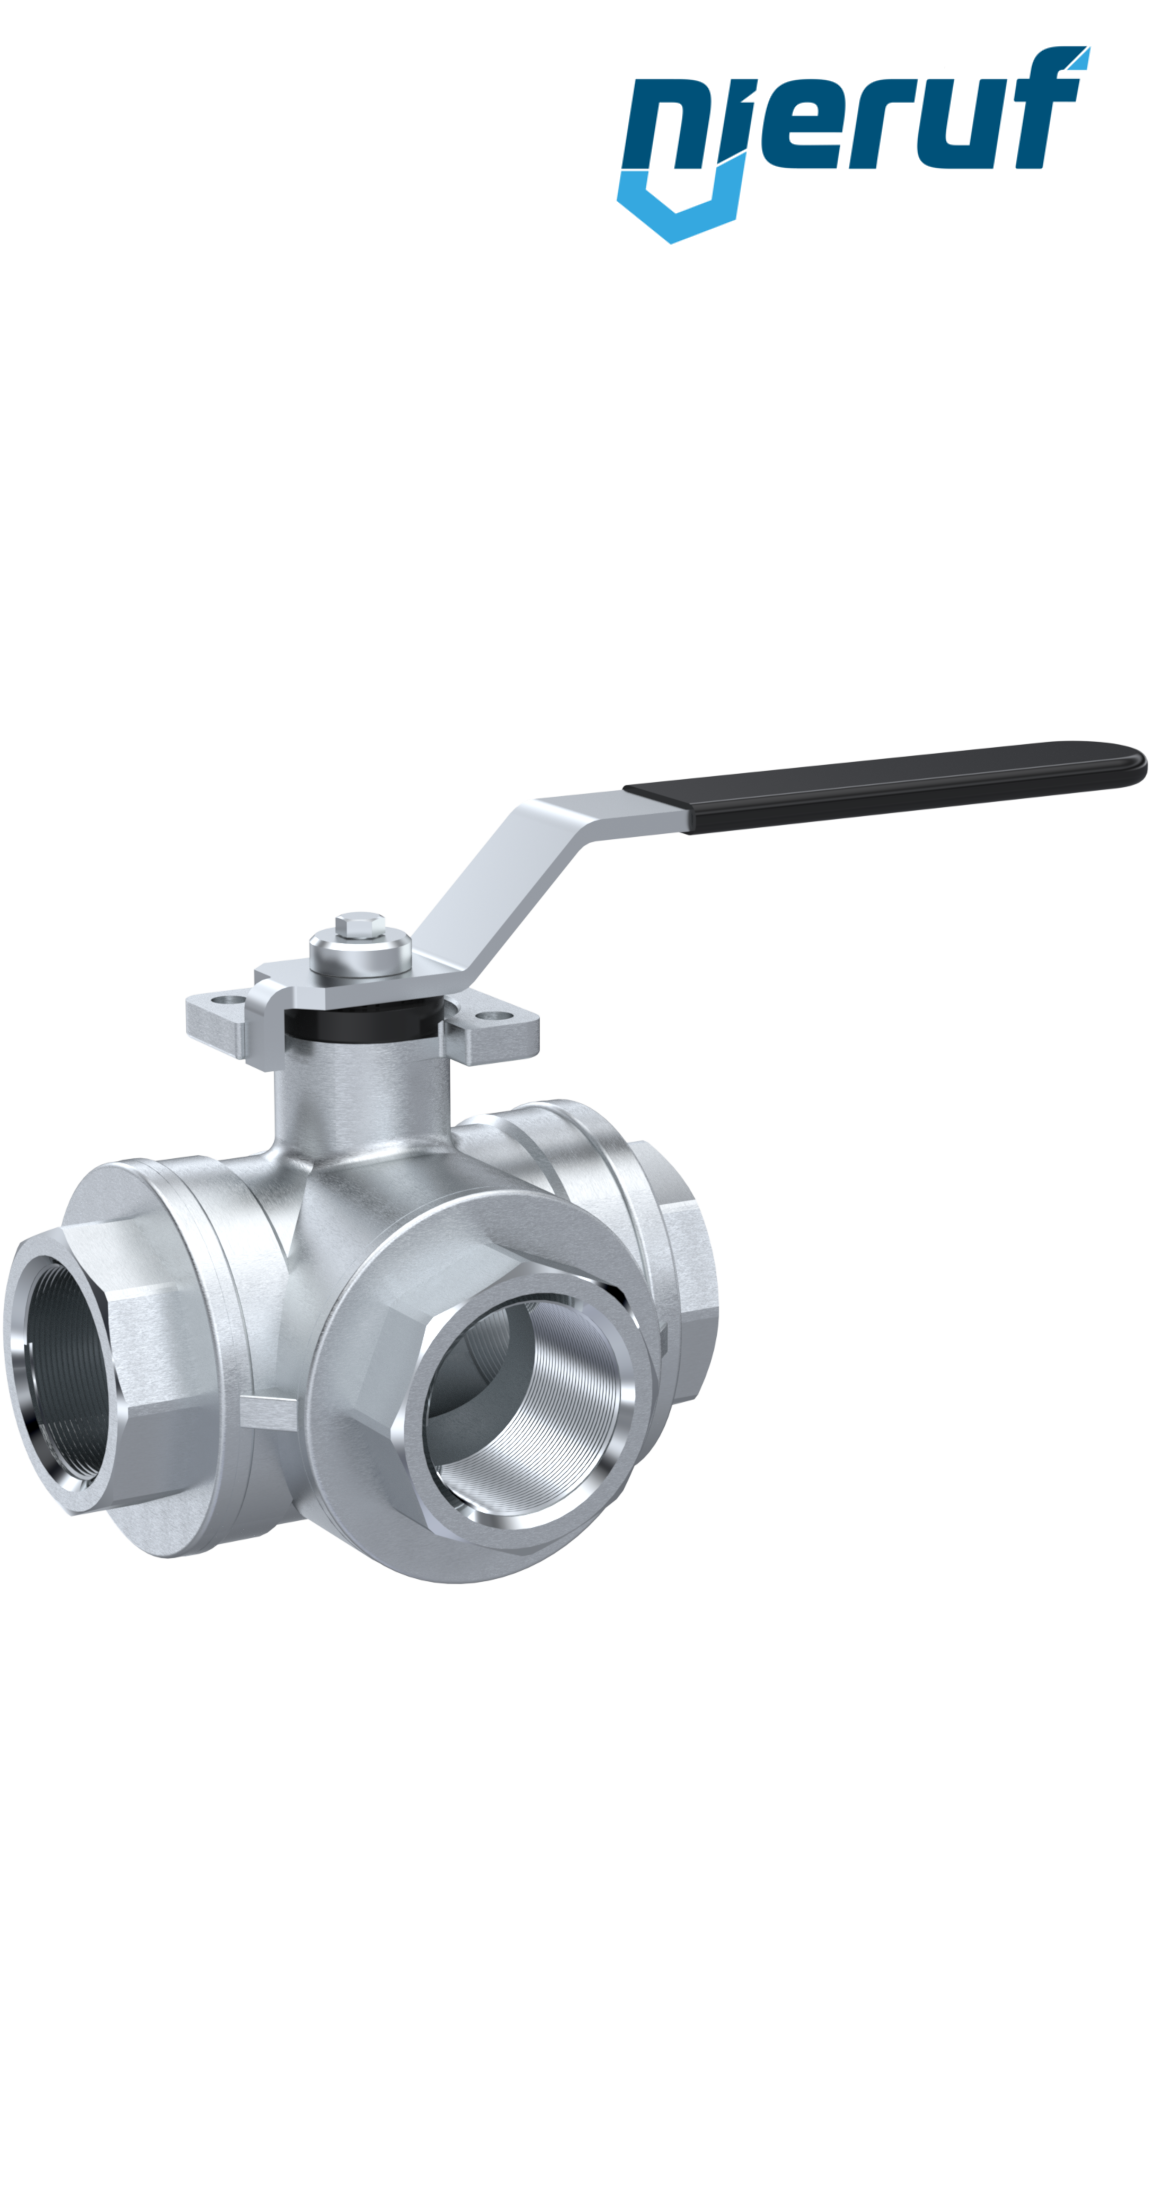 3  way brass ball valve DN25 - 1" inch GK08 full port design with L drilling